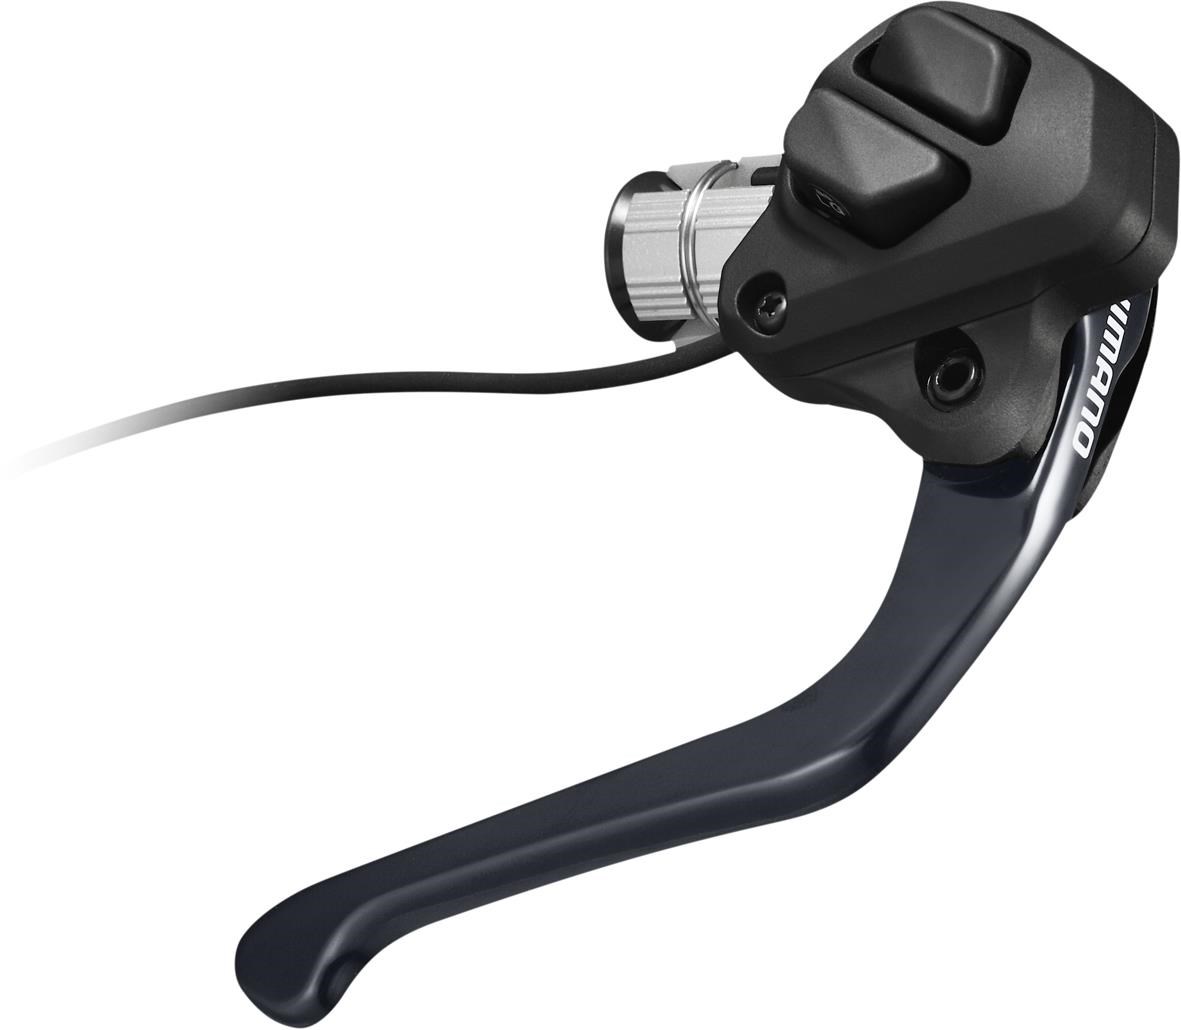 Shimano ST-6871 Ultegra Di2 STI For TT / Tri Bar Without Cables Right Hand product image